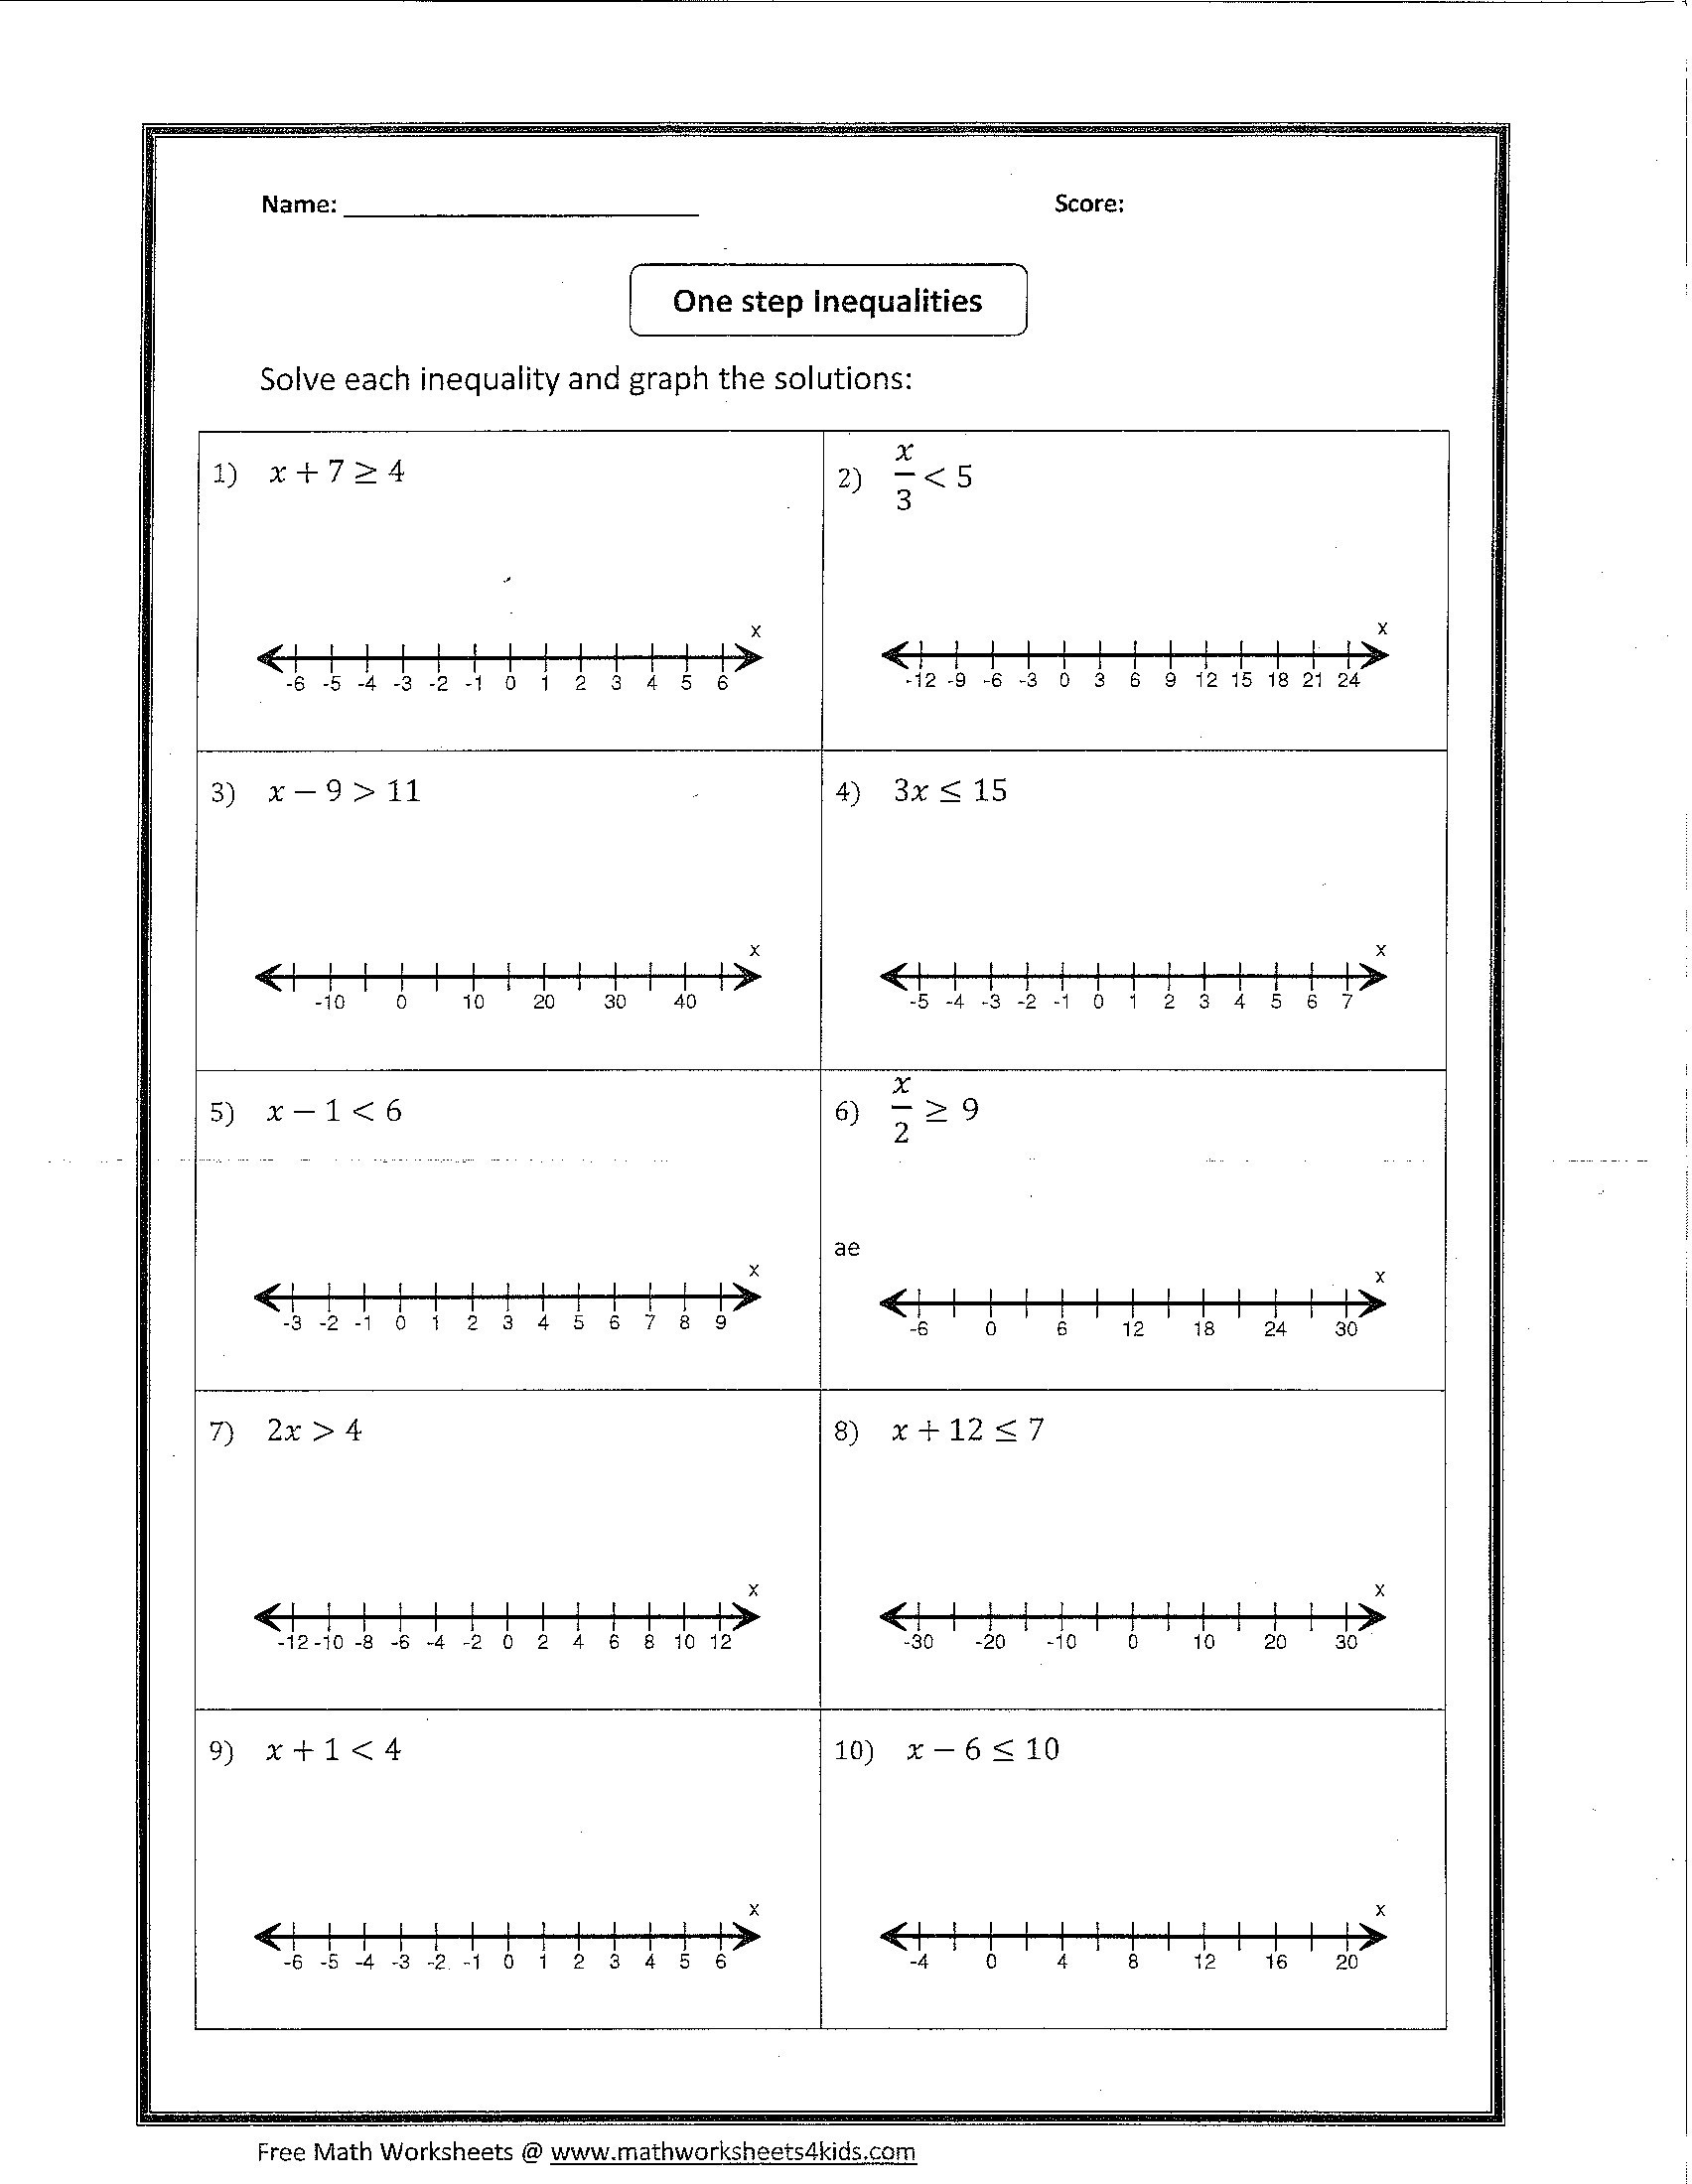 Graphing Linear Inequalities Worksheet Lovely Linear Equations Worksheet with Answers